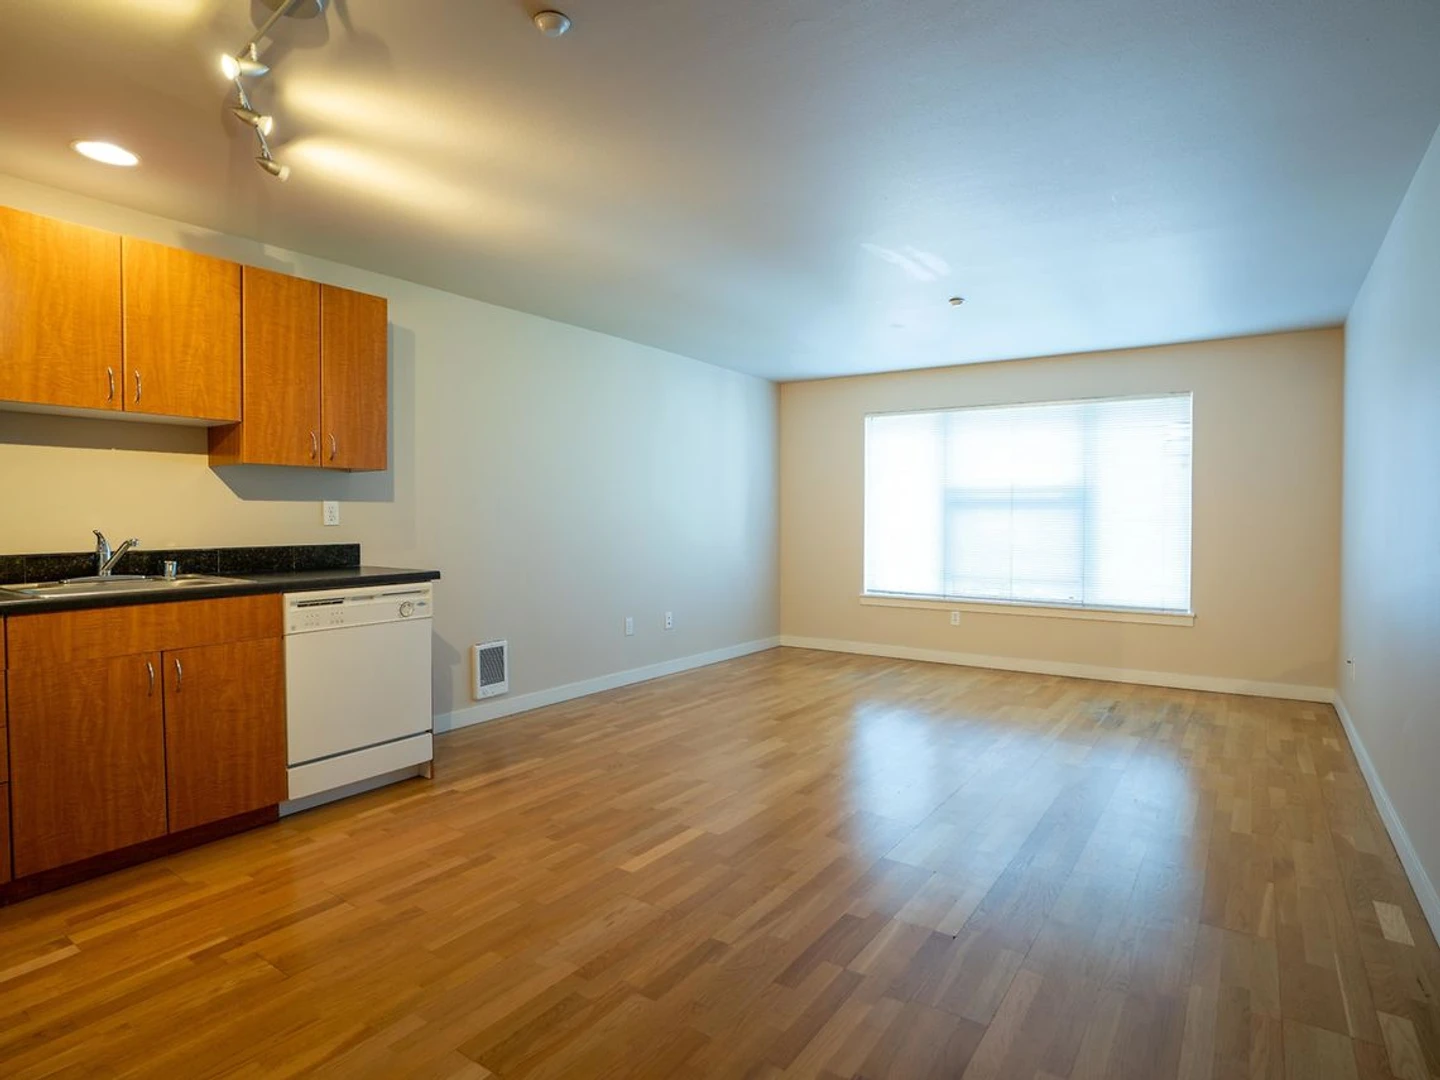 Room for rent in a shared flat in Seattle